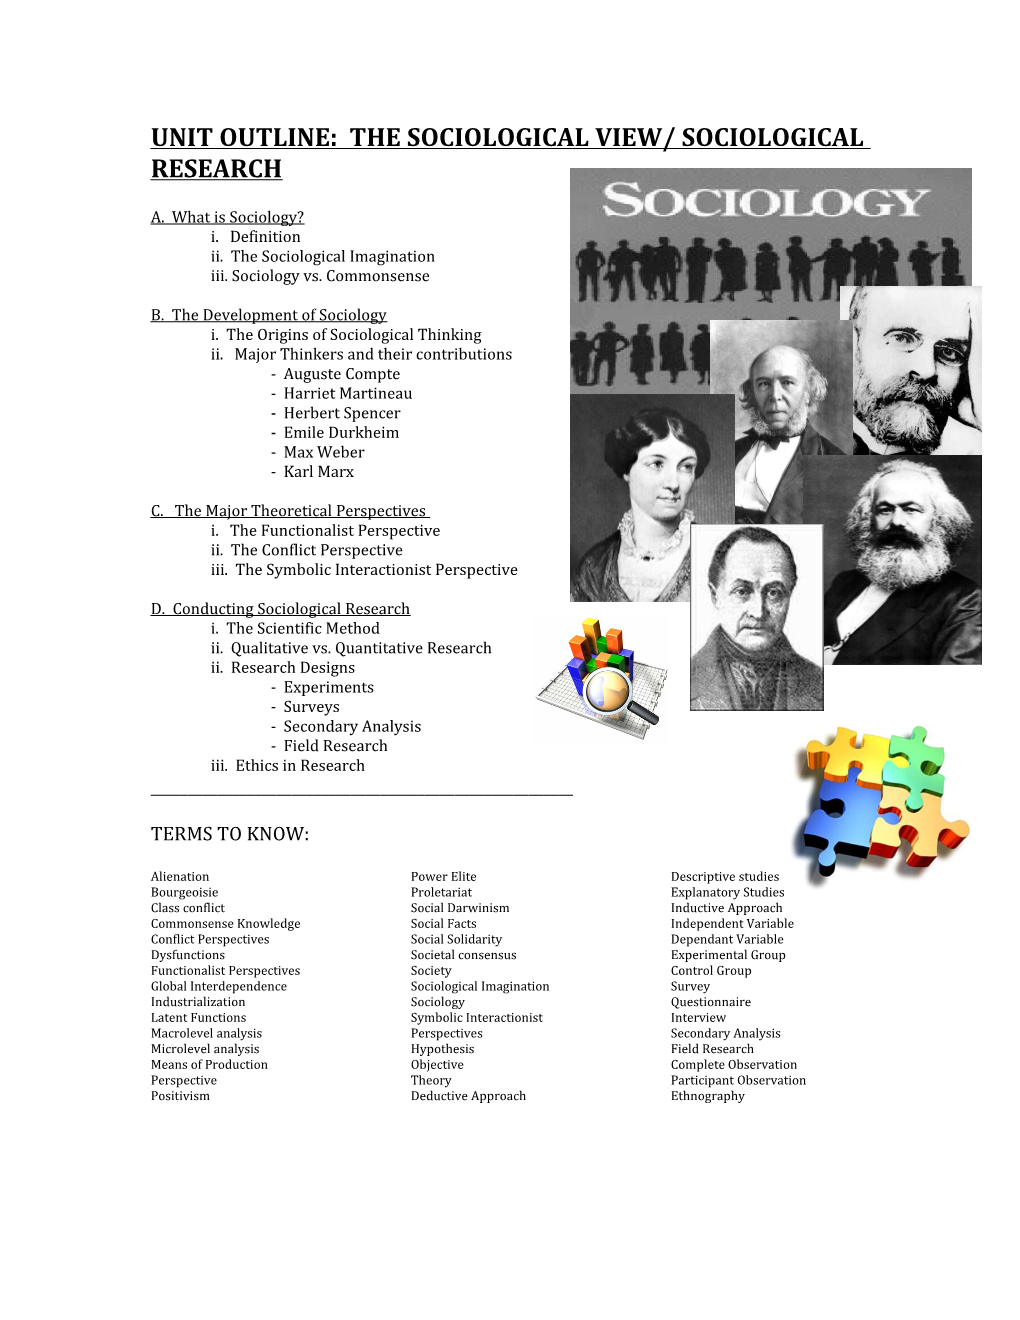 Unit Outline: the Sociological View/ Sociological Research